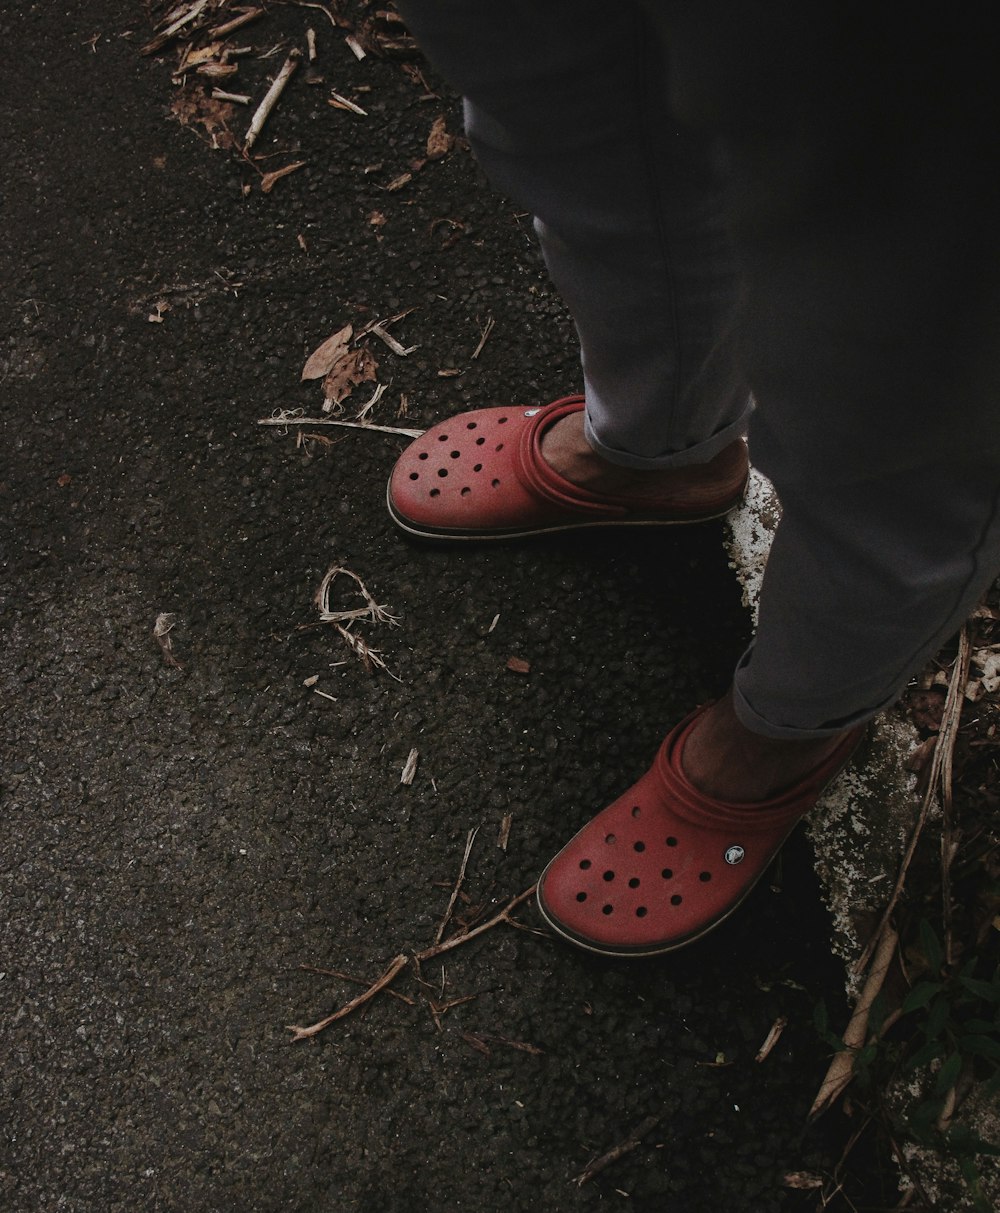 person wearing red Crocs rubber clogs